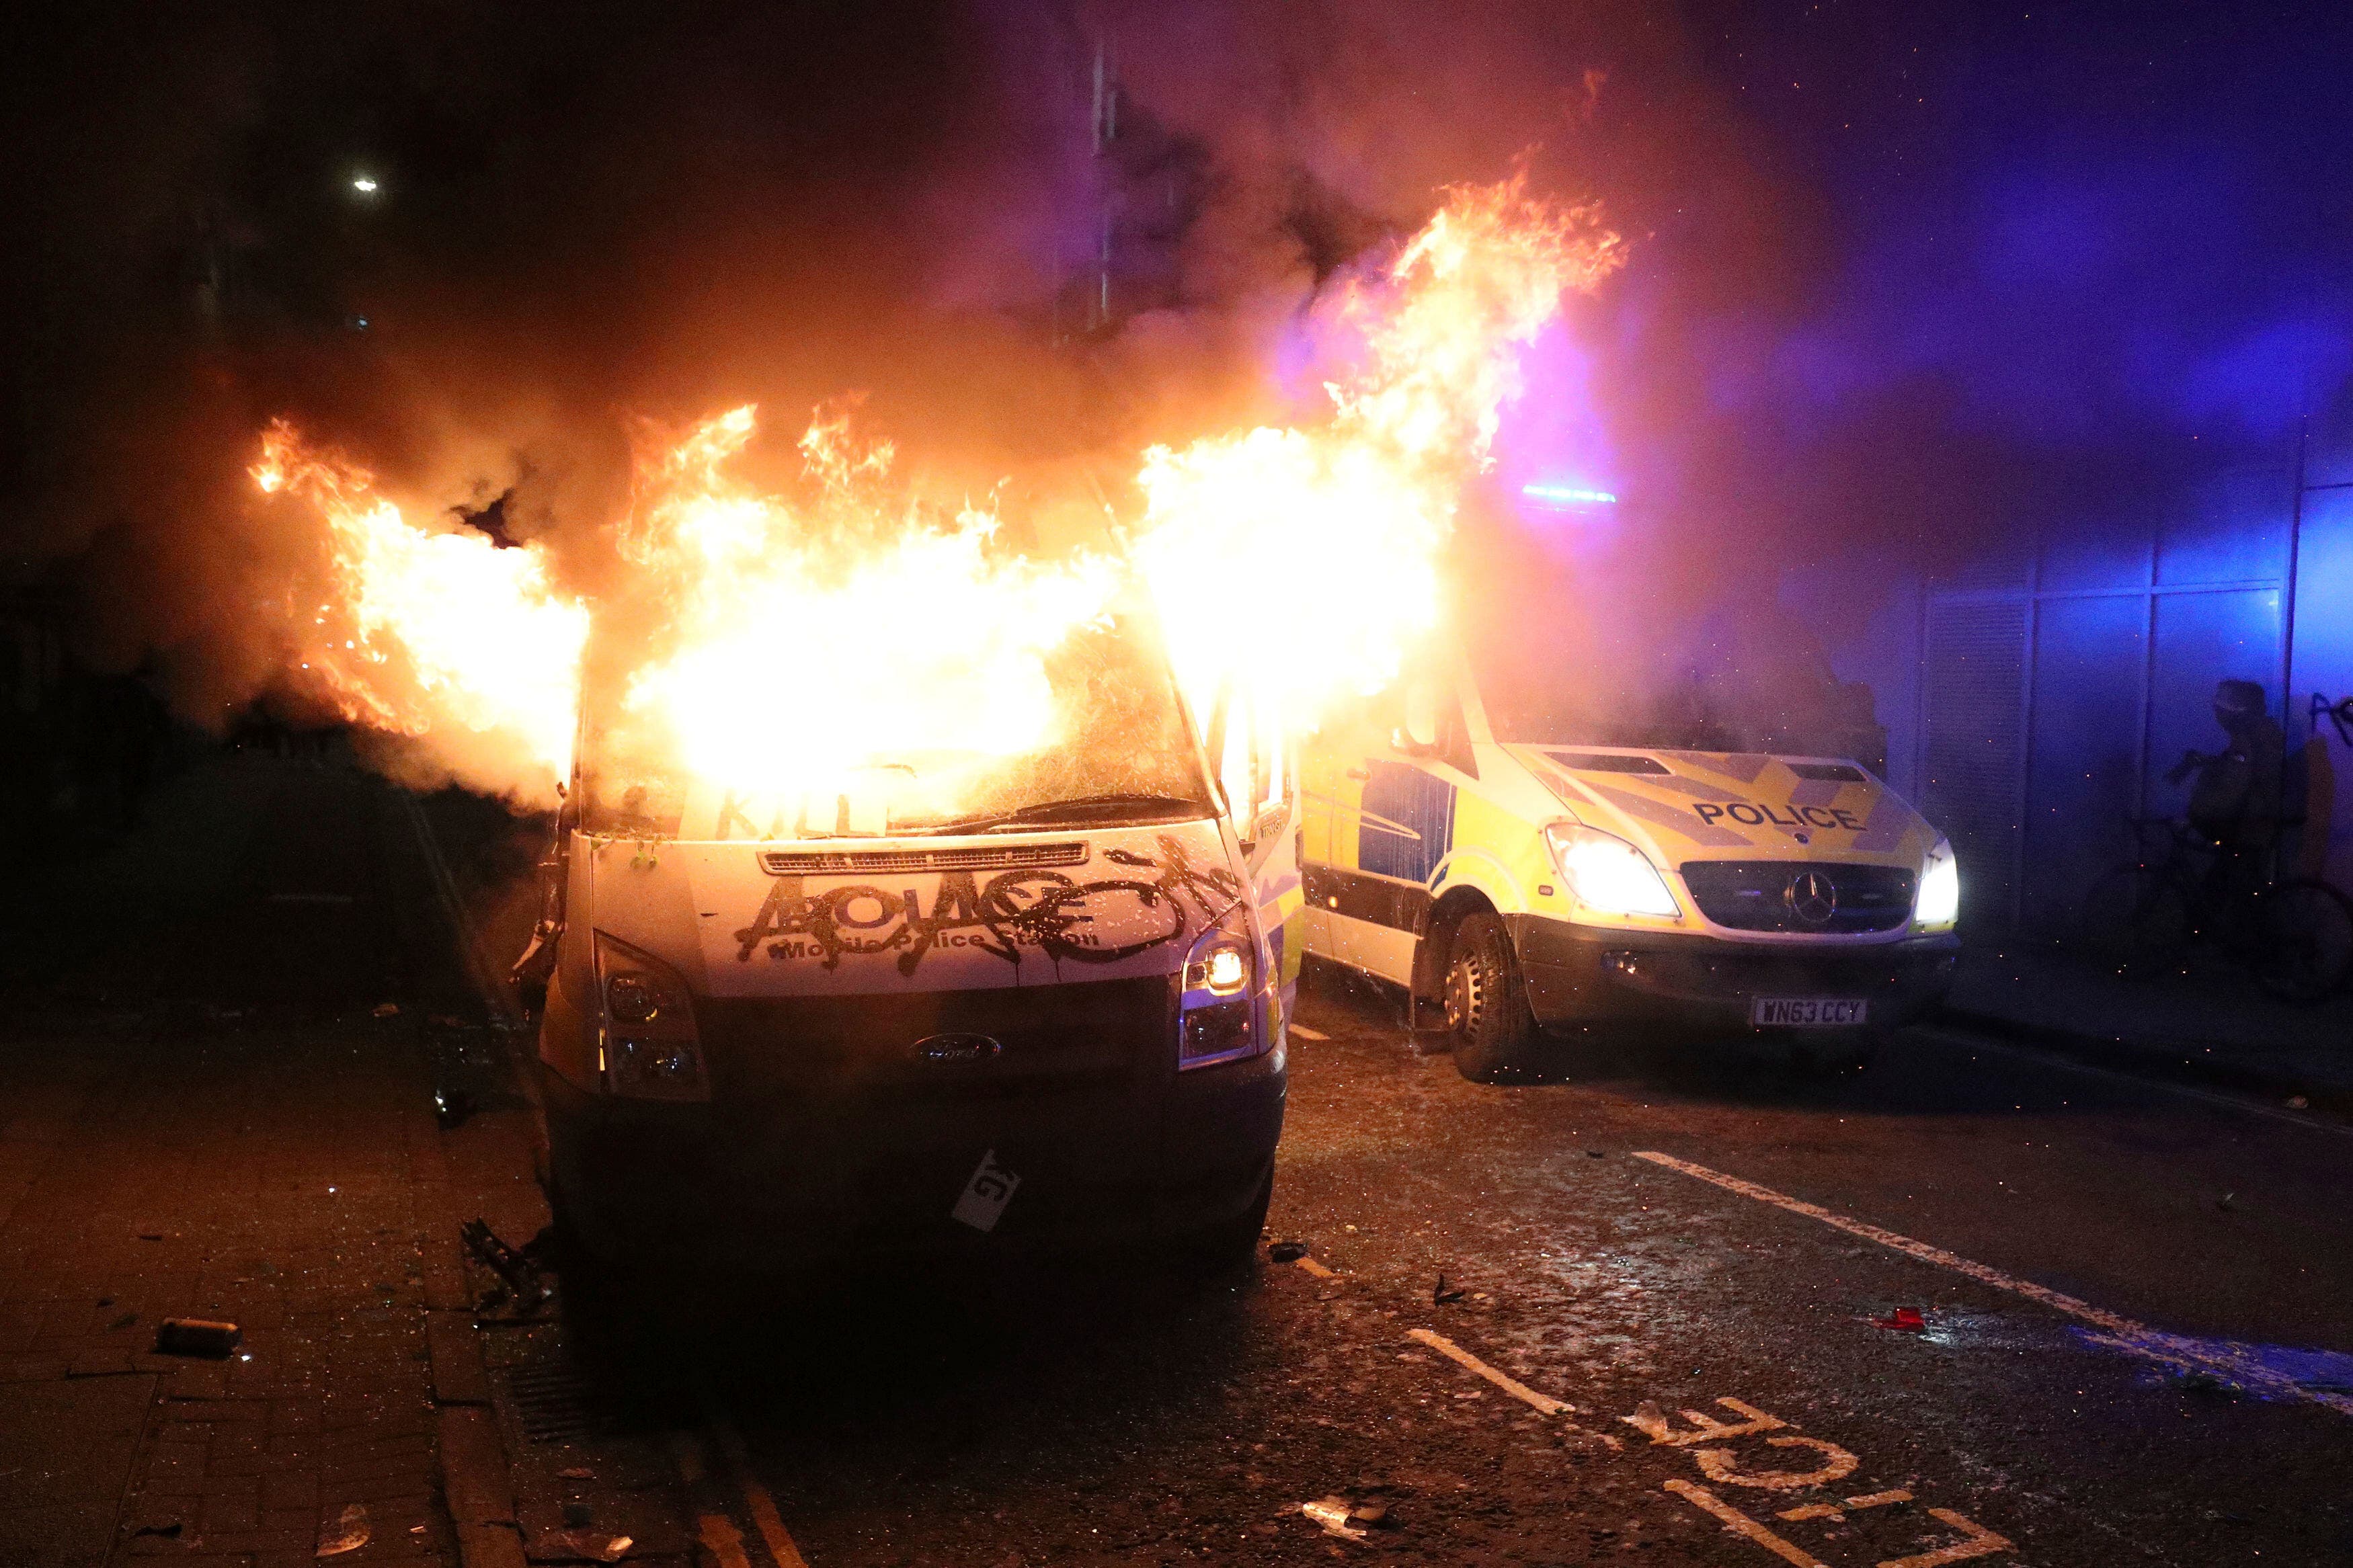 Police officers hurt, vehicles set on fire in violent protest in Bristol, England